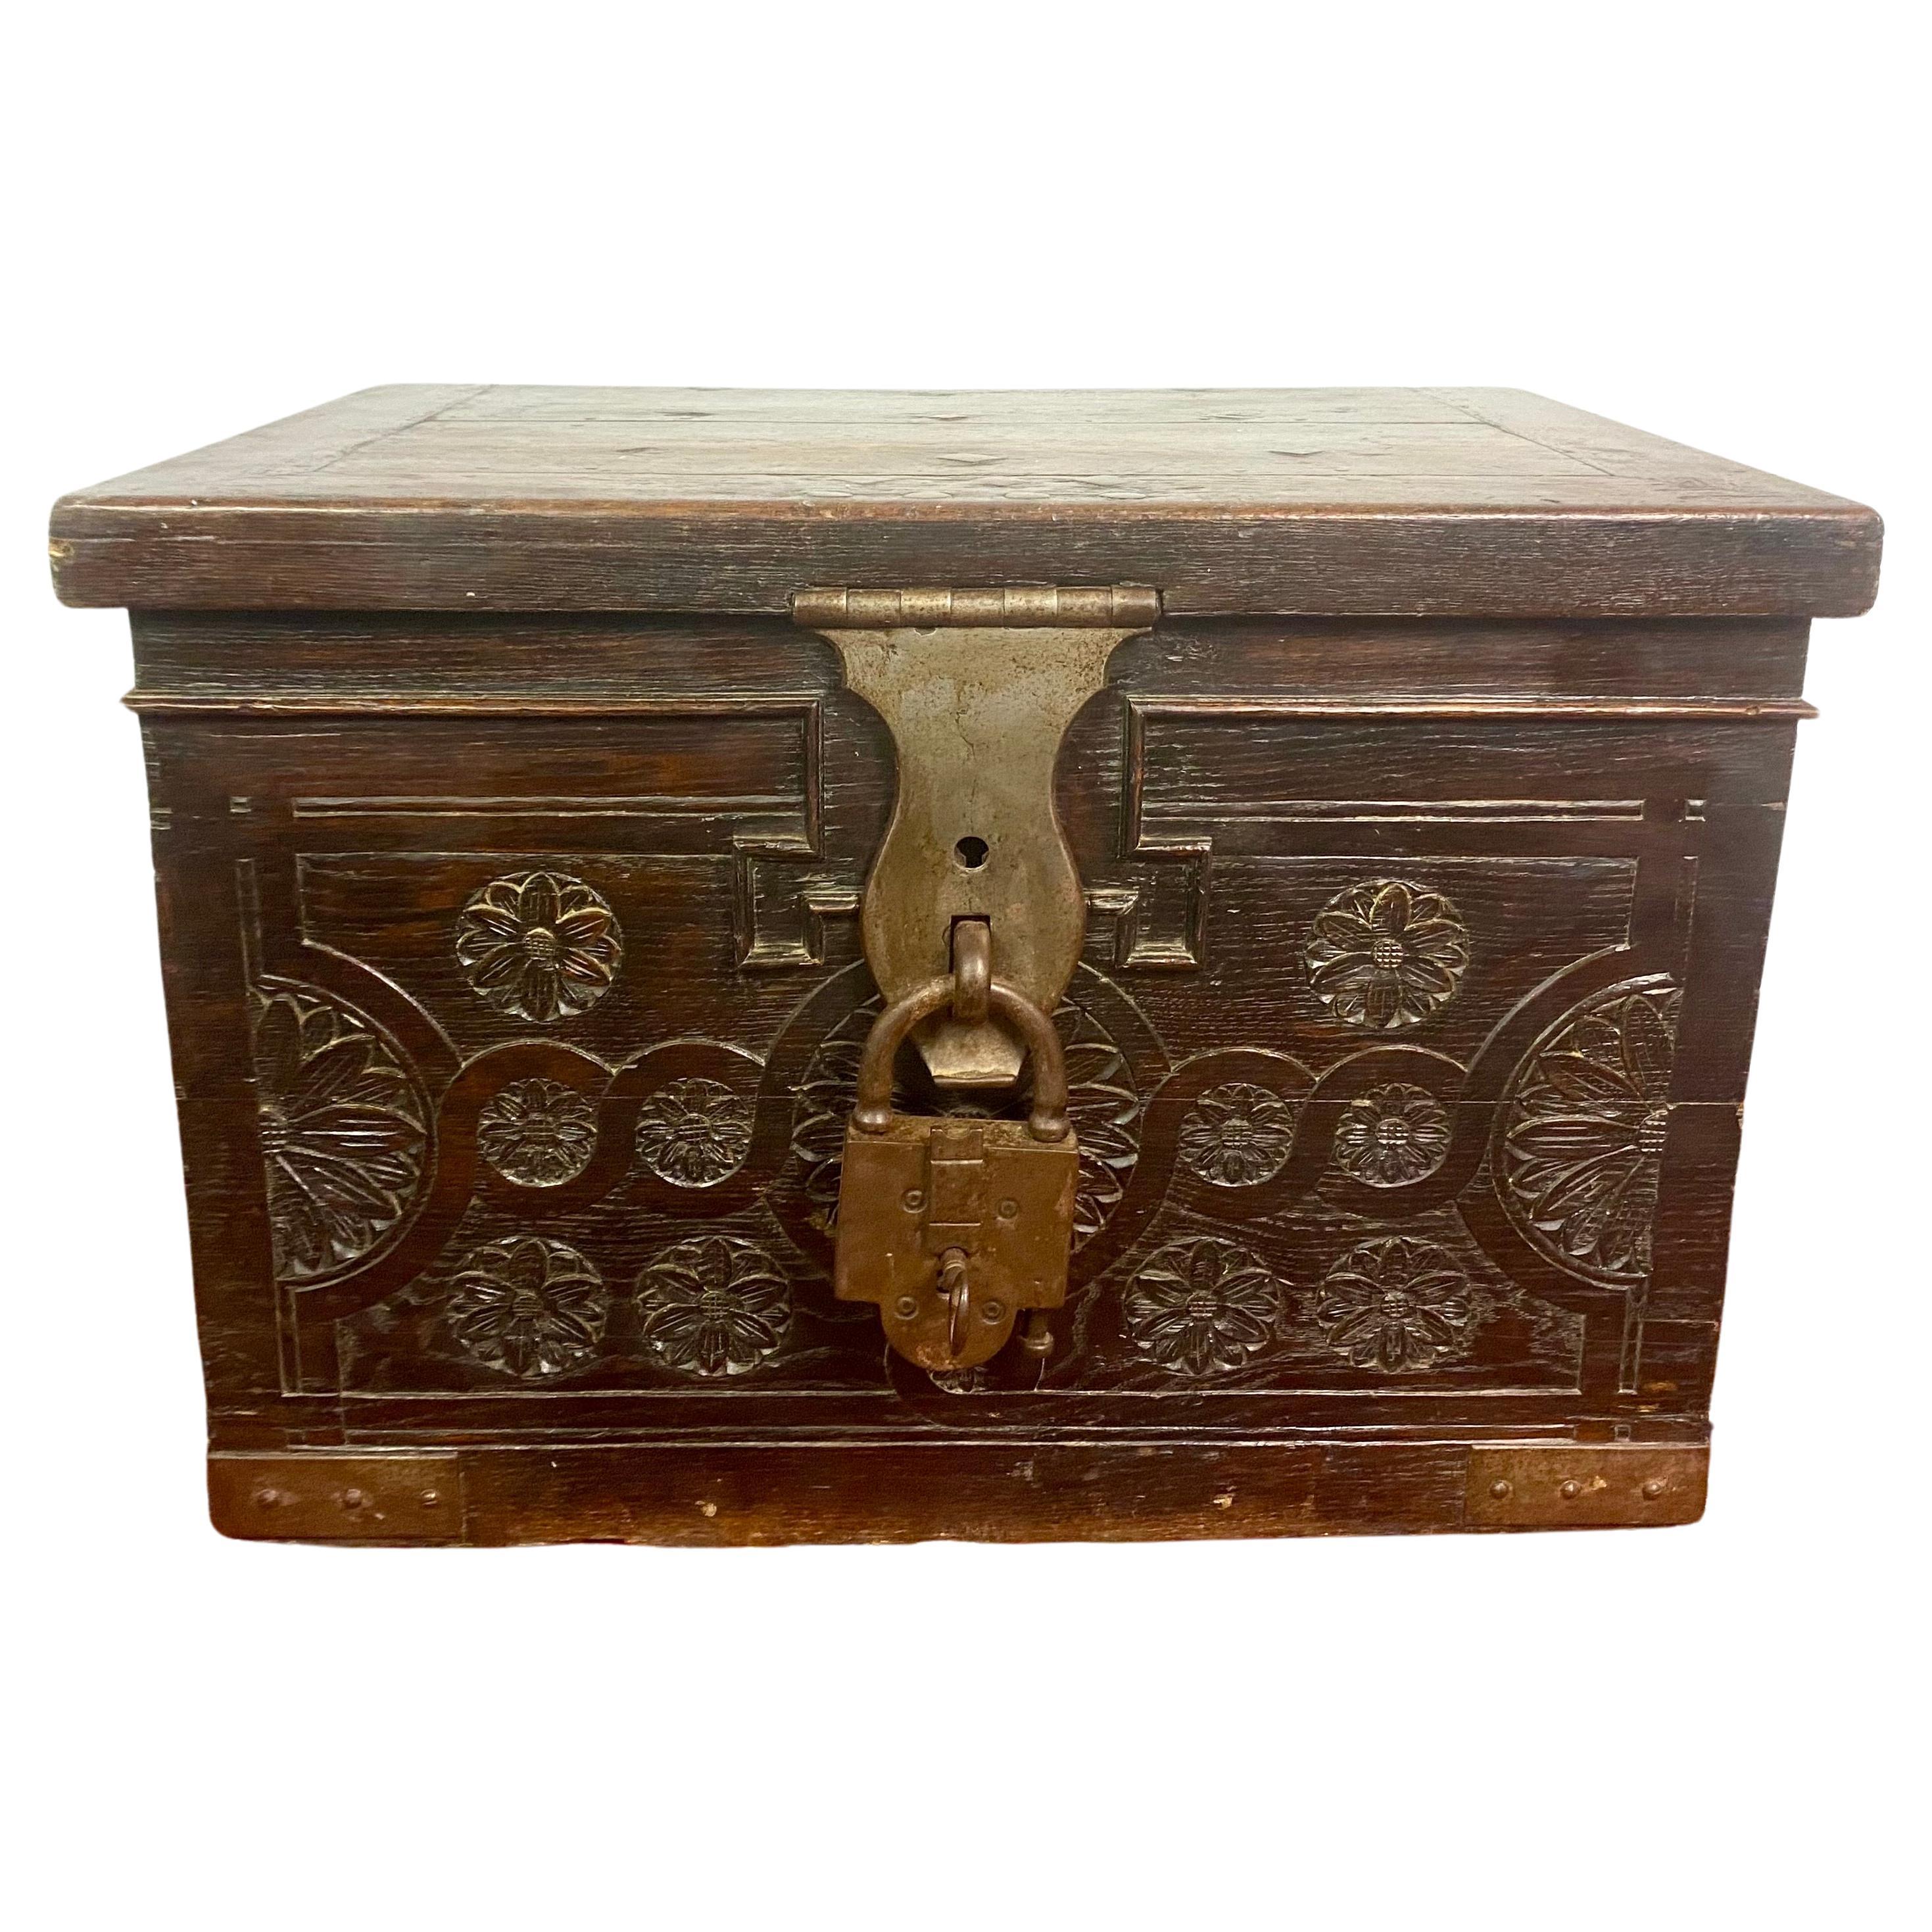 Exceptional and extremely rare privateer/pirate chest in solid oak.
The wood is richly carved with rosettes.
The bottom of the trunk is pierced with holes which allowed it to be bolted to the floor in the captain's cabin on boats.
The interior has